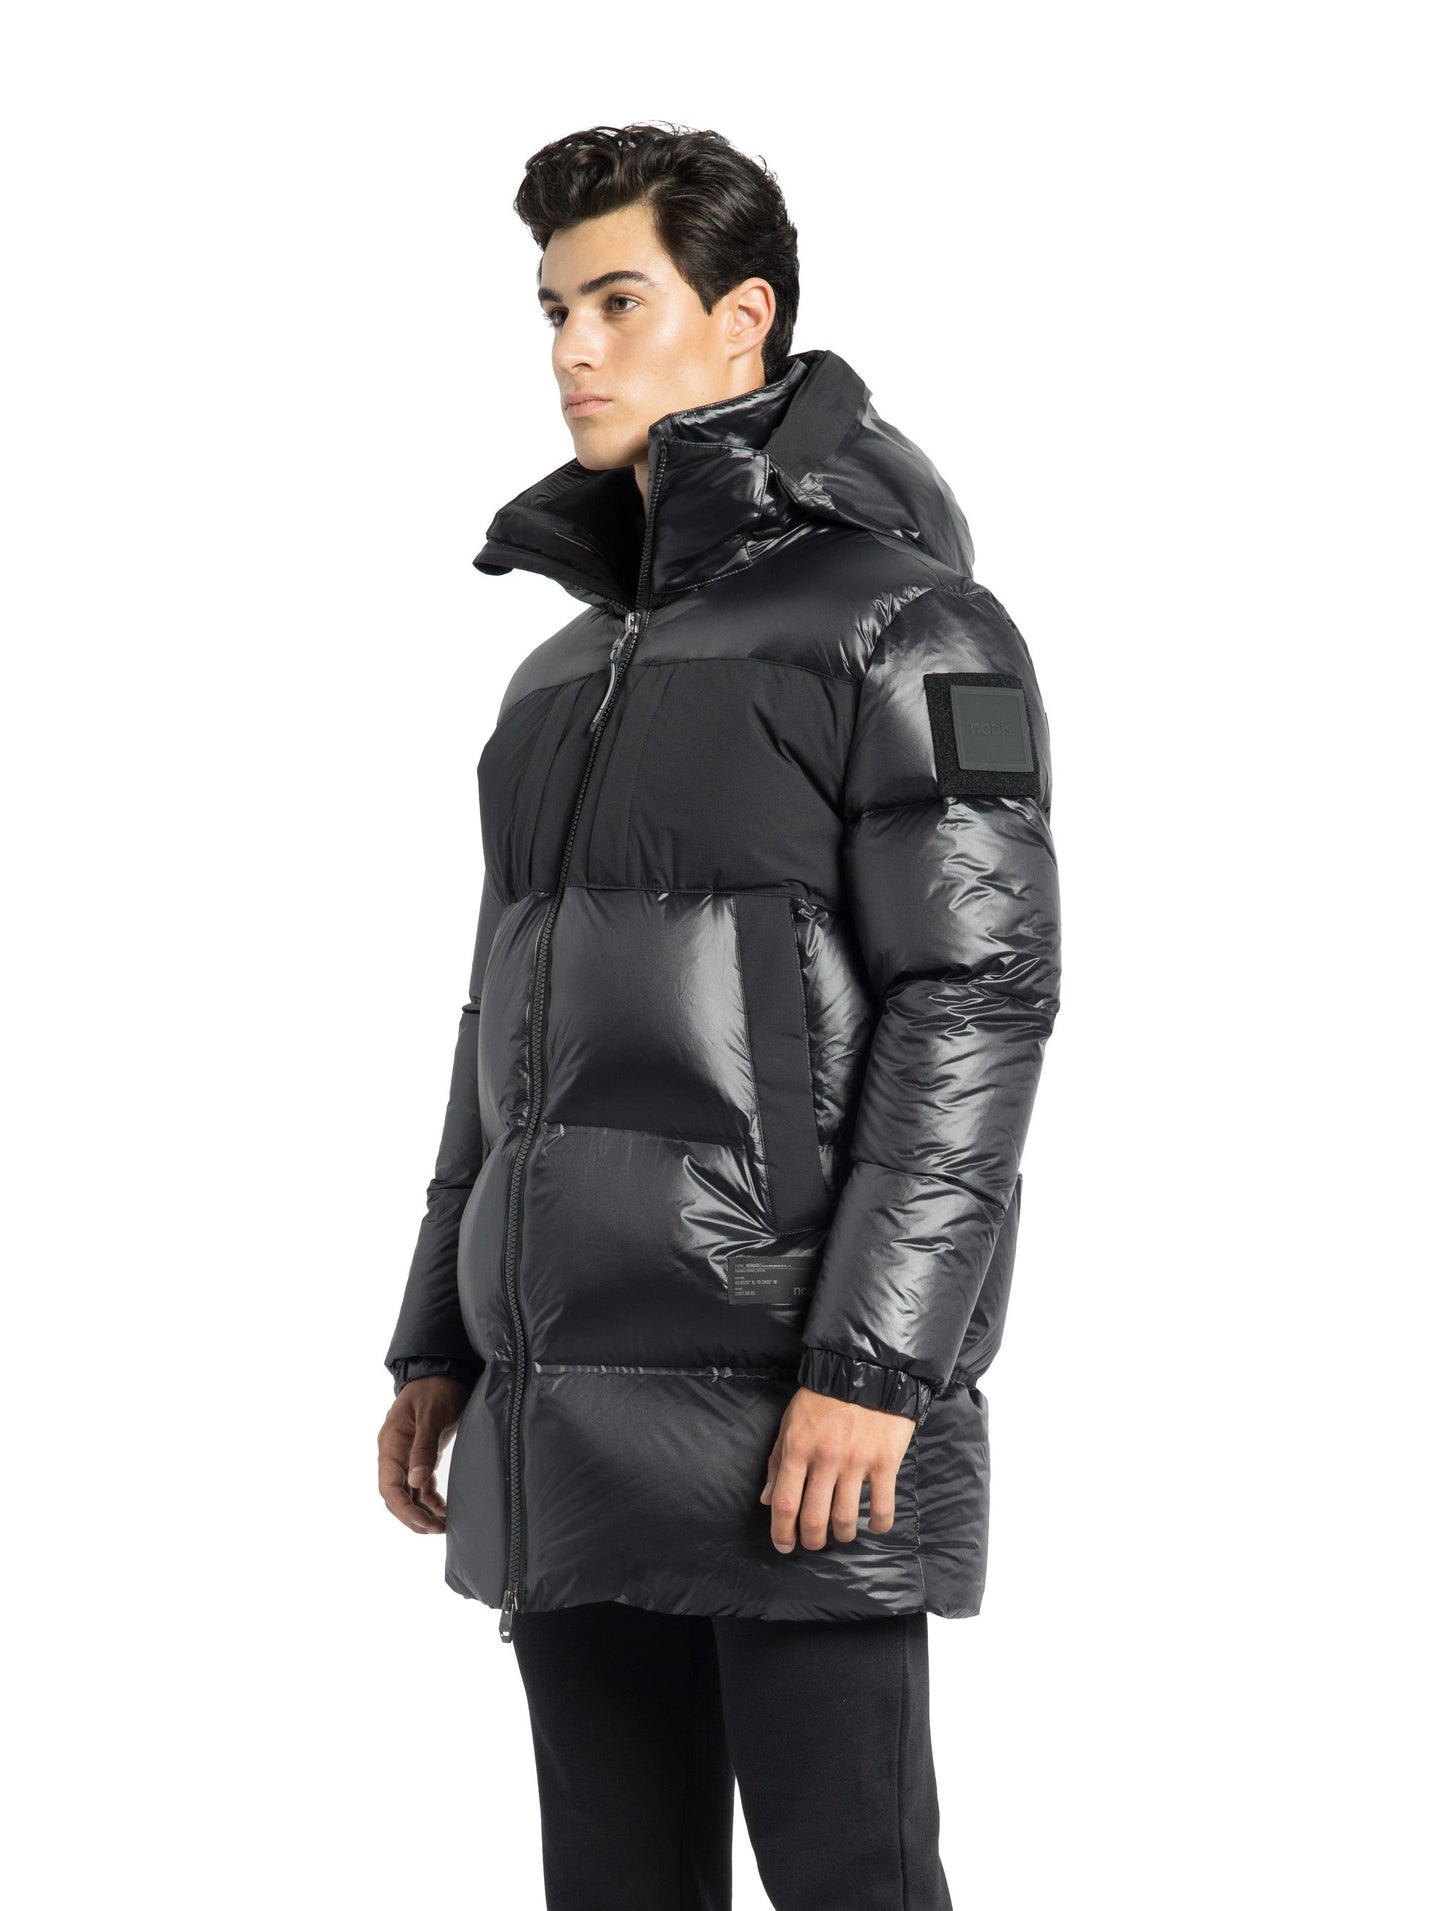 Neelix Men's Long Puffer Jacket in thigh length, premium cire technical nylon taffeta and stretch ripstop fabrication, Premium Canadian origin White Duck Down insulation, non-removable down-filled hood, two-way centre-front zipper, pit zipper vents, hidden chest zipper pockets, fleece-lined magnetic closure waist pockets, in Black